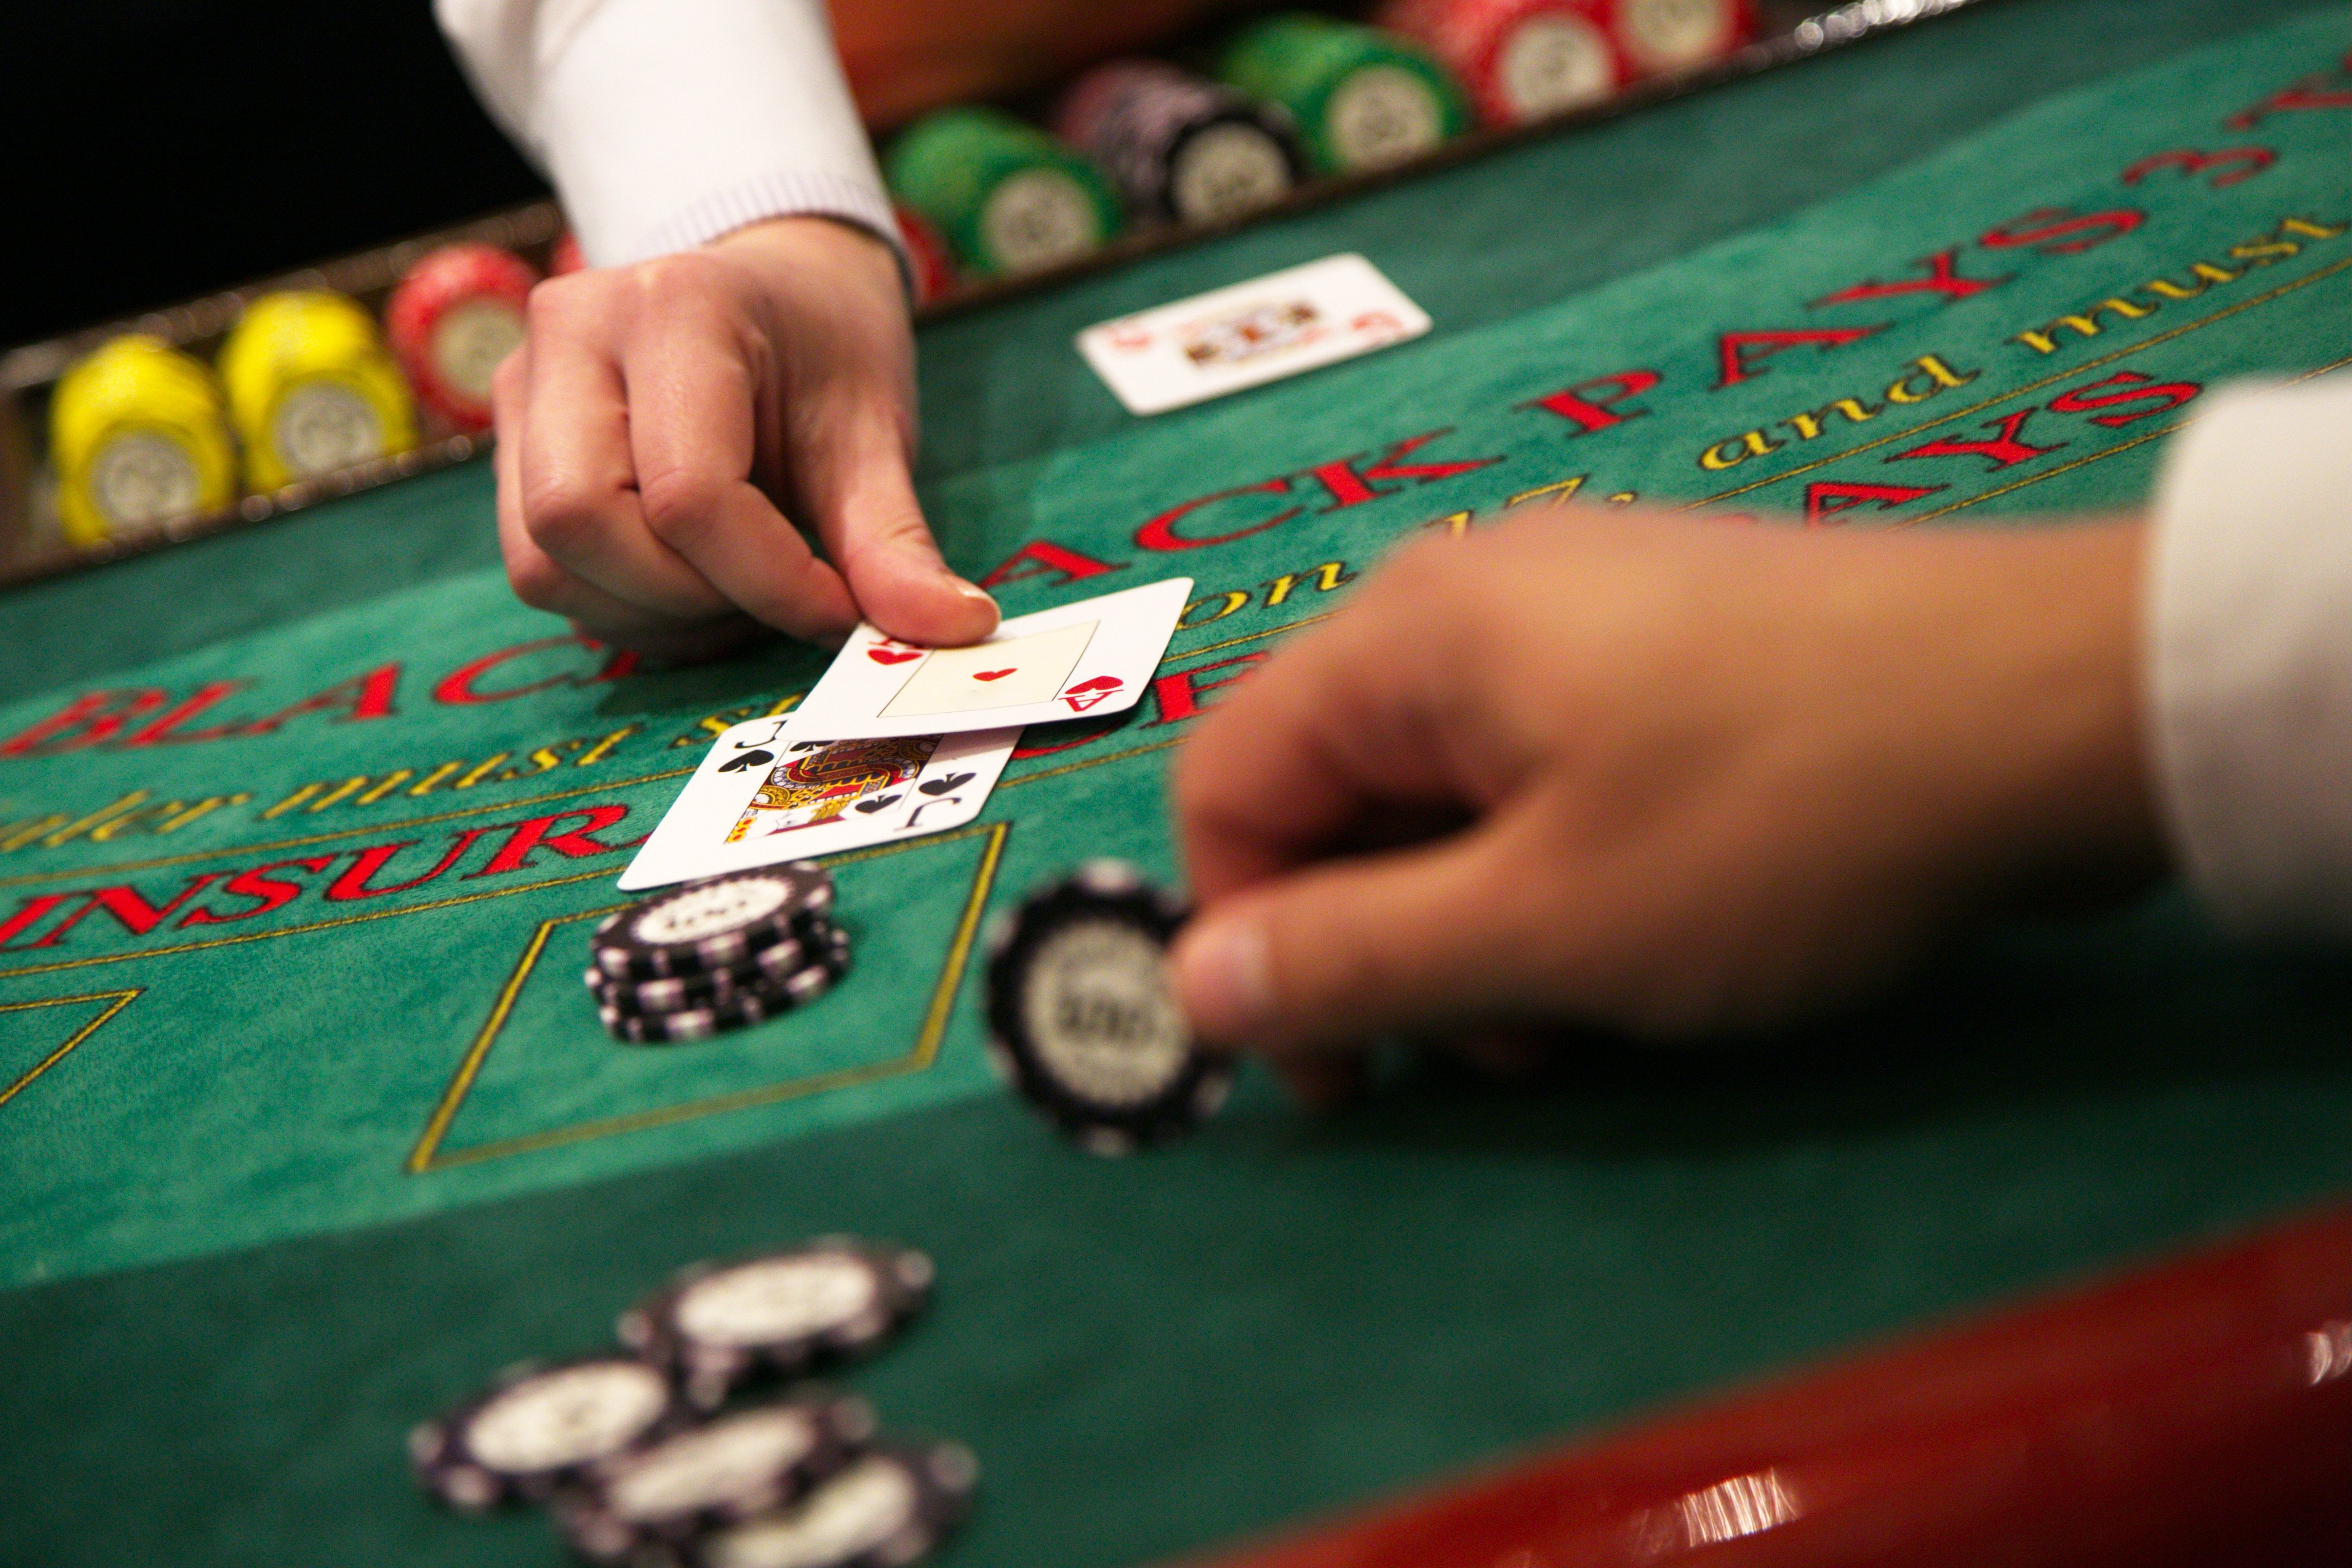 A junket operator in Macau has been jailed for 14 years for illegal VIP gambling room operations. Photo: Shutterstock